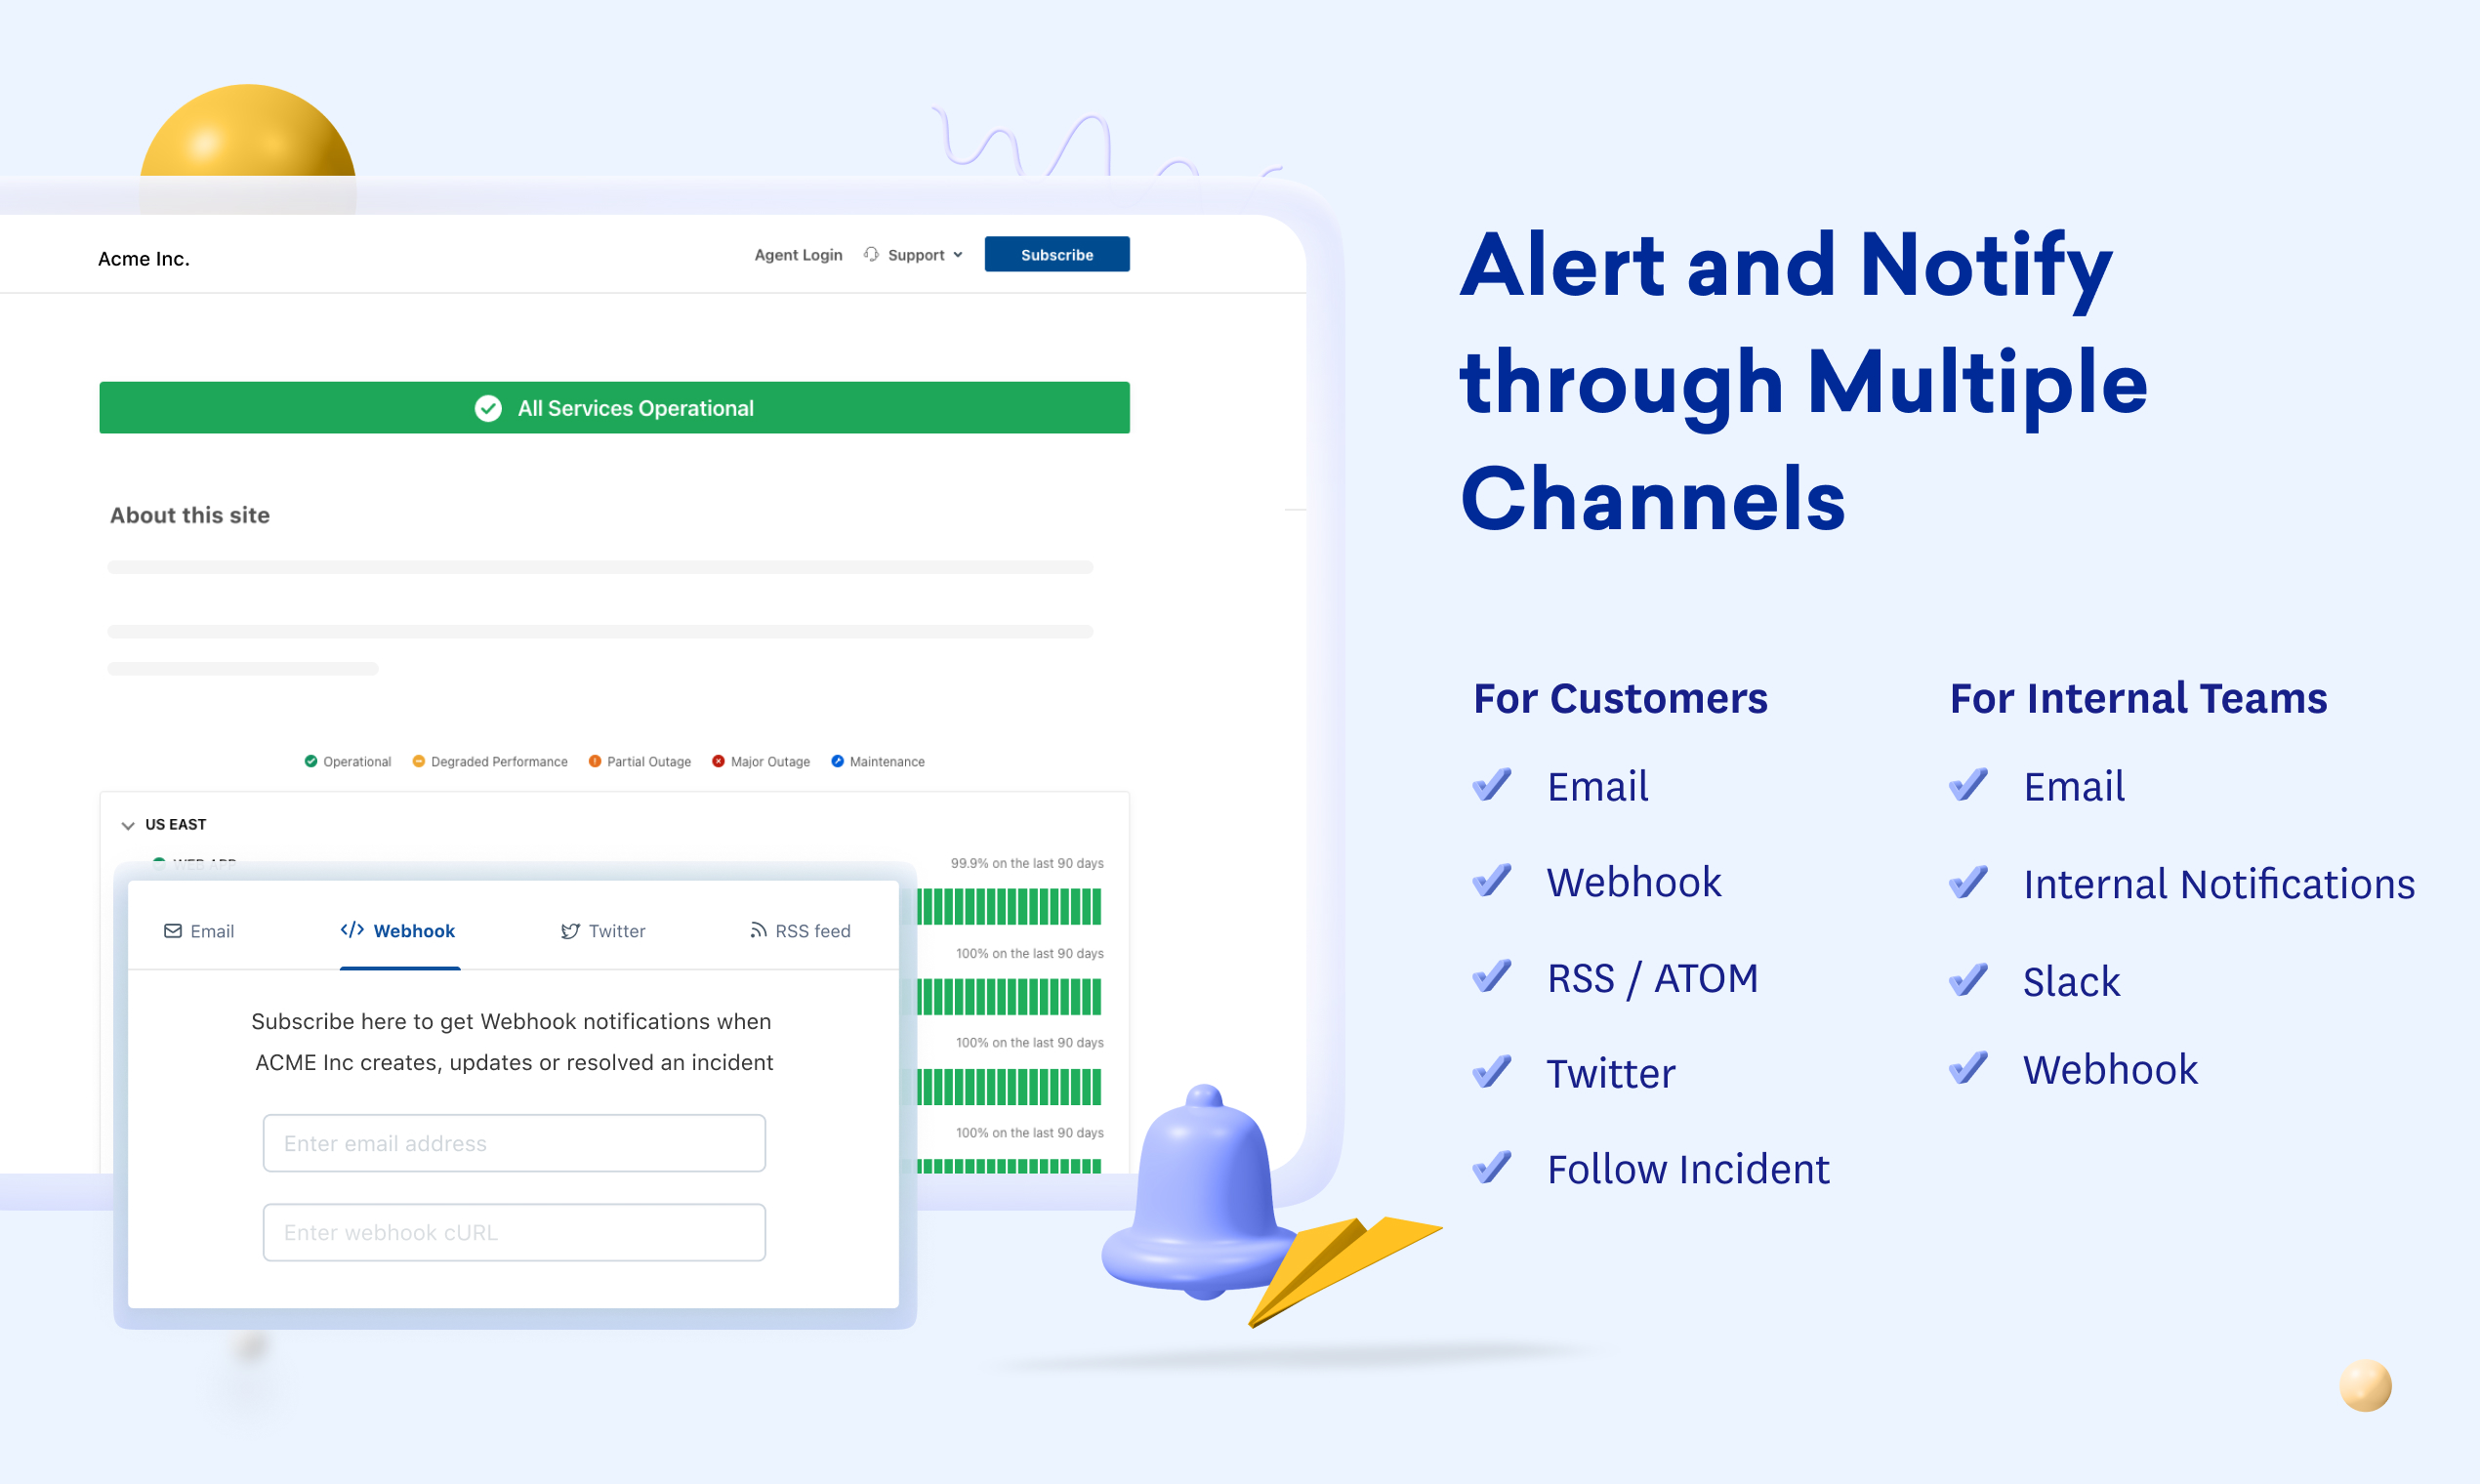 Alert and Notify through multiple channels